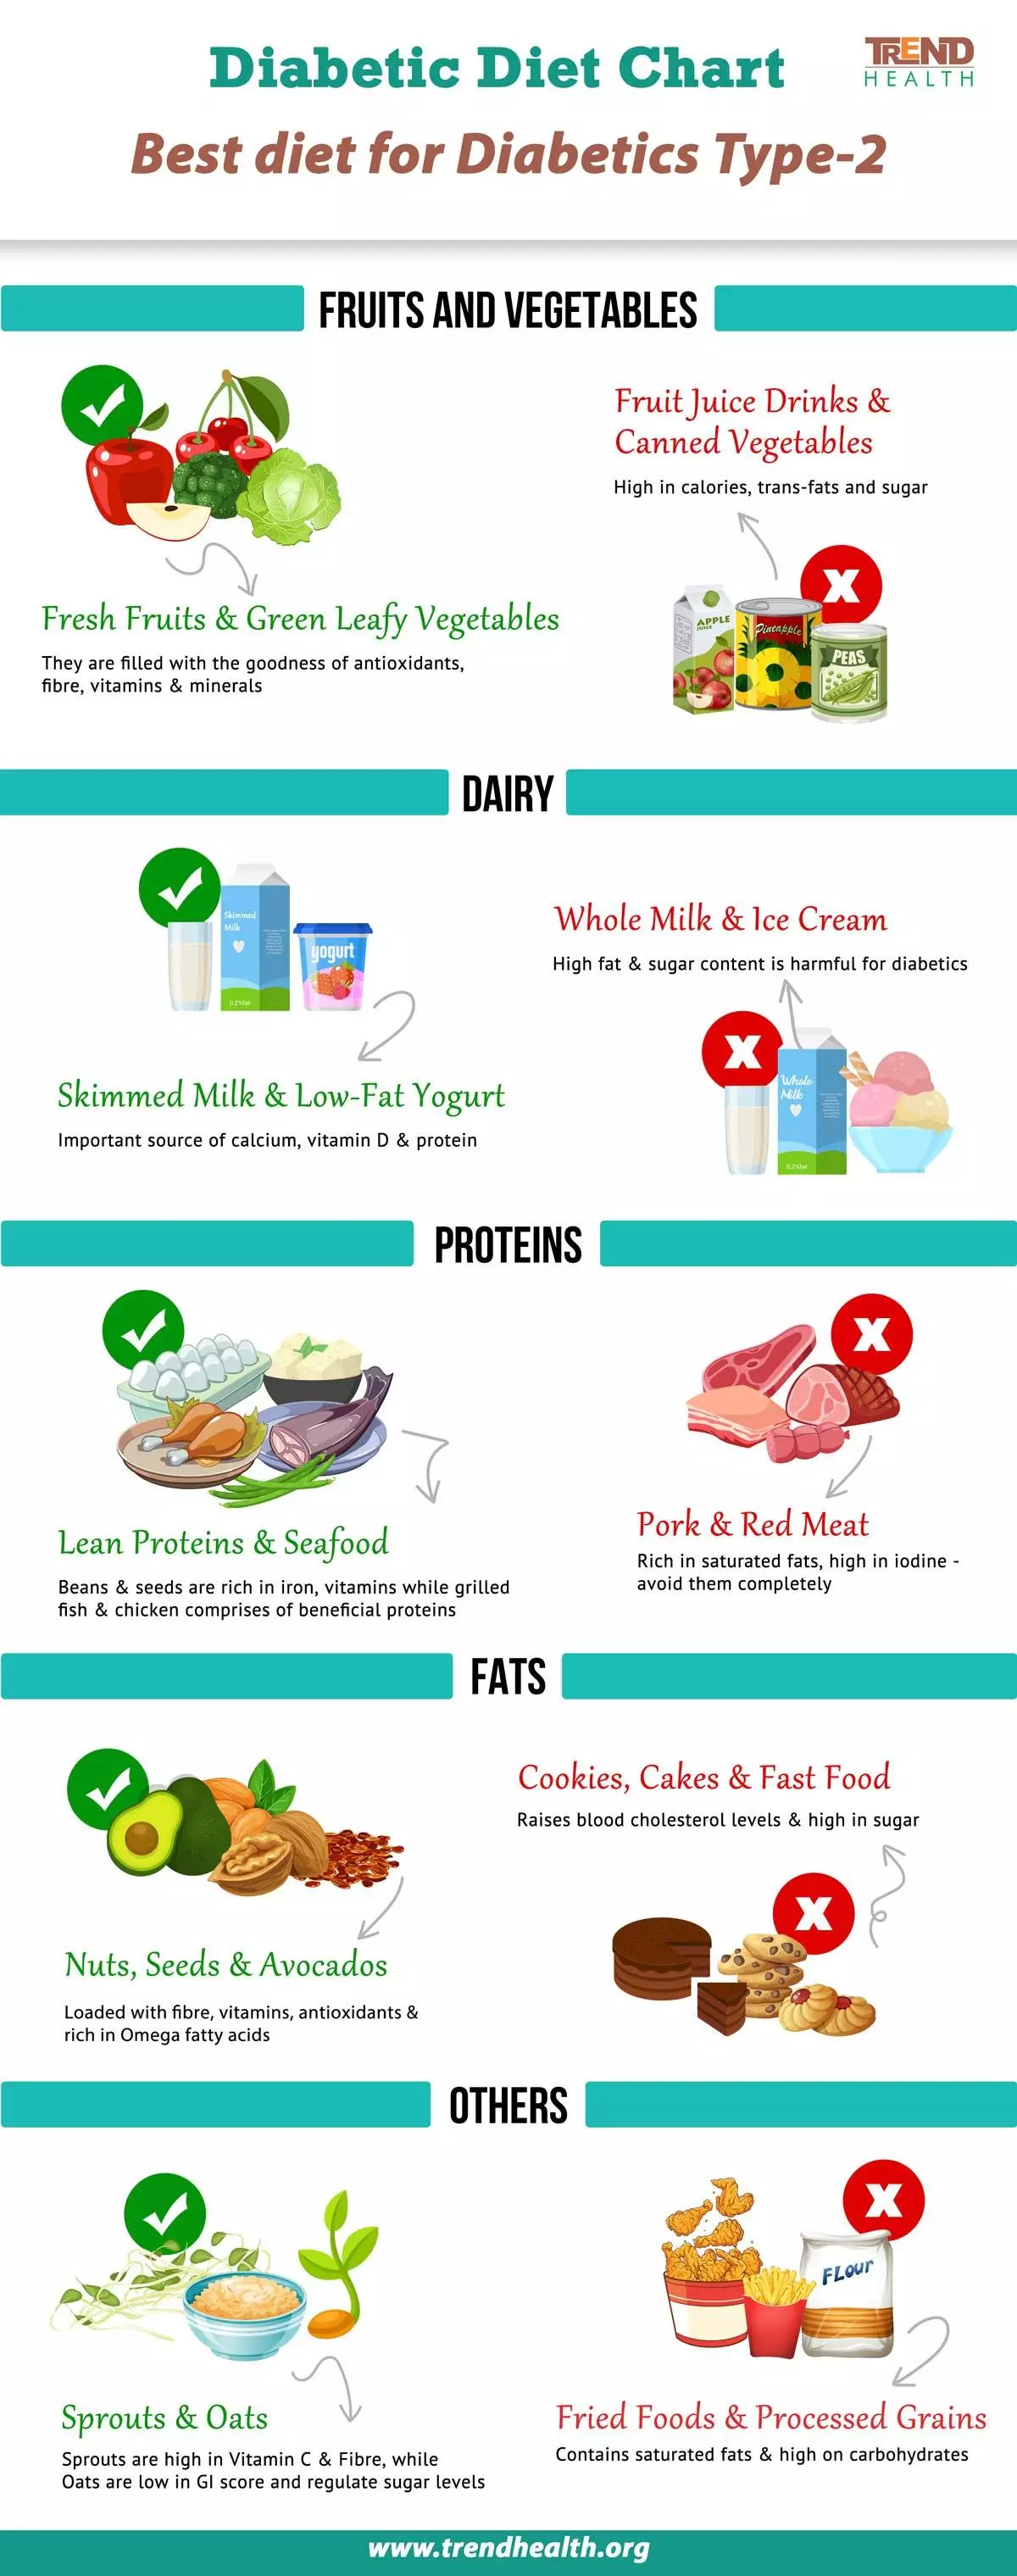 How to Stop Weight Loss in Diabetes?, Diabetic Diet Chart, trend health